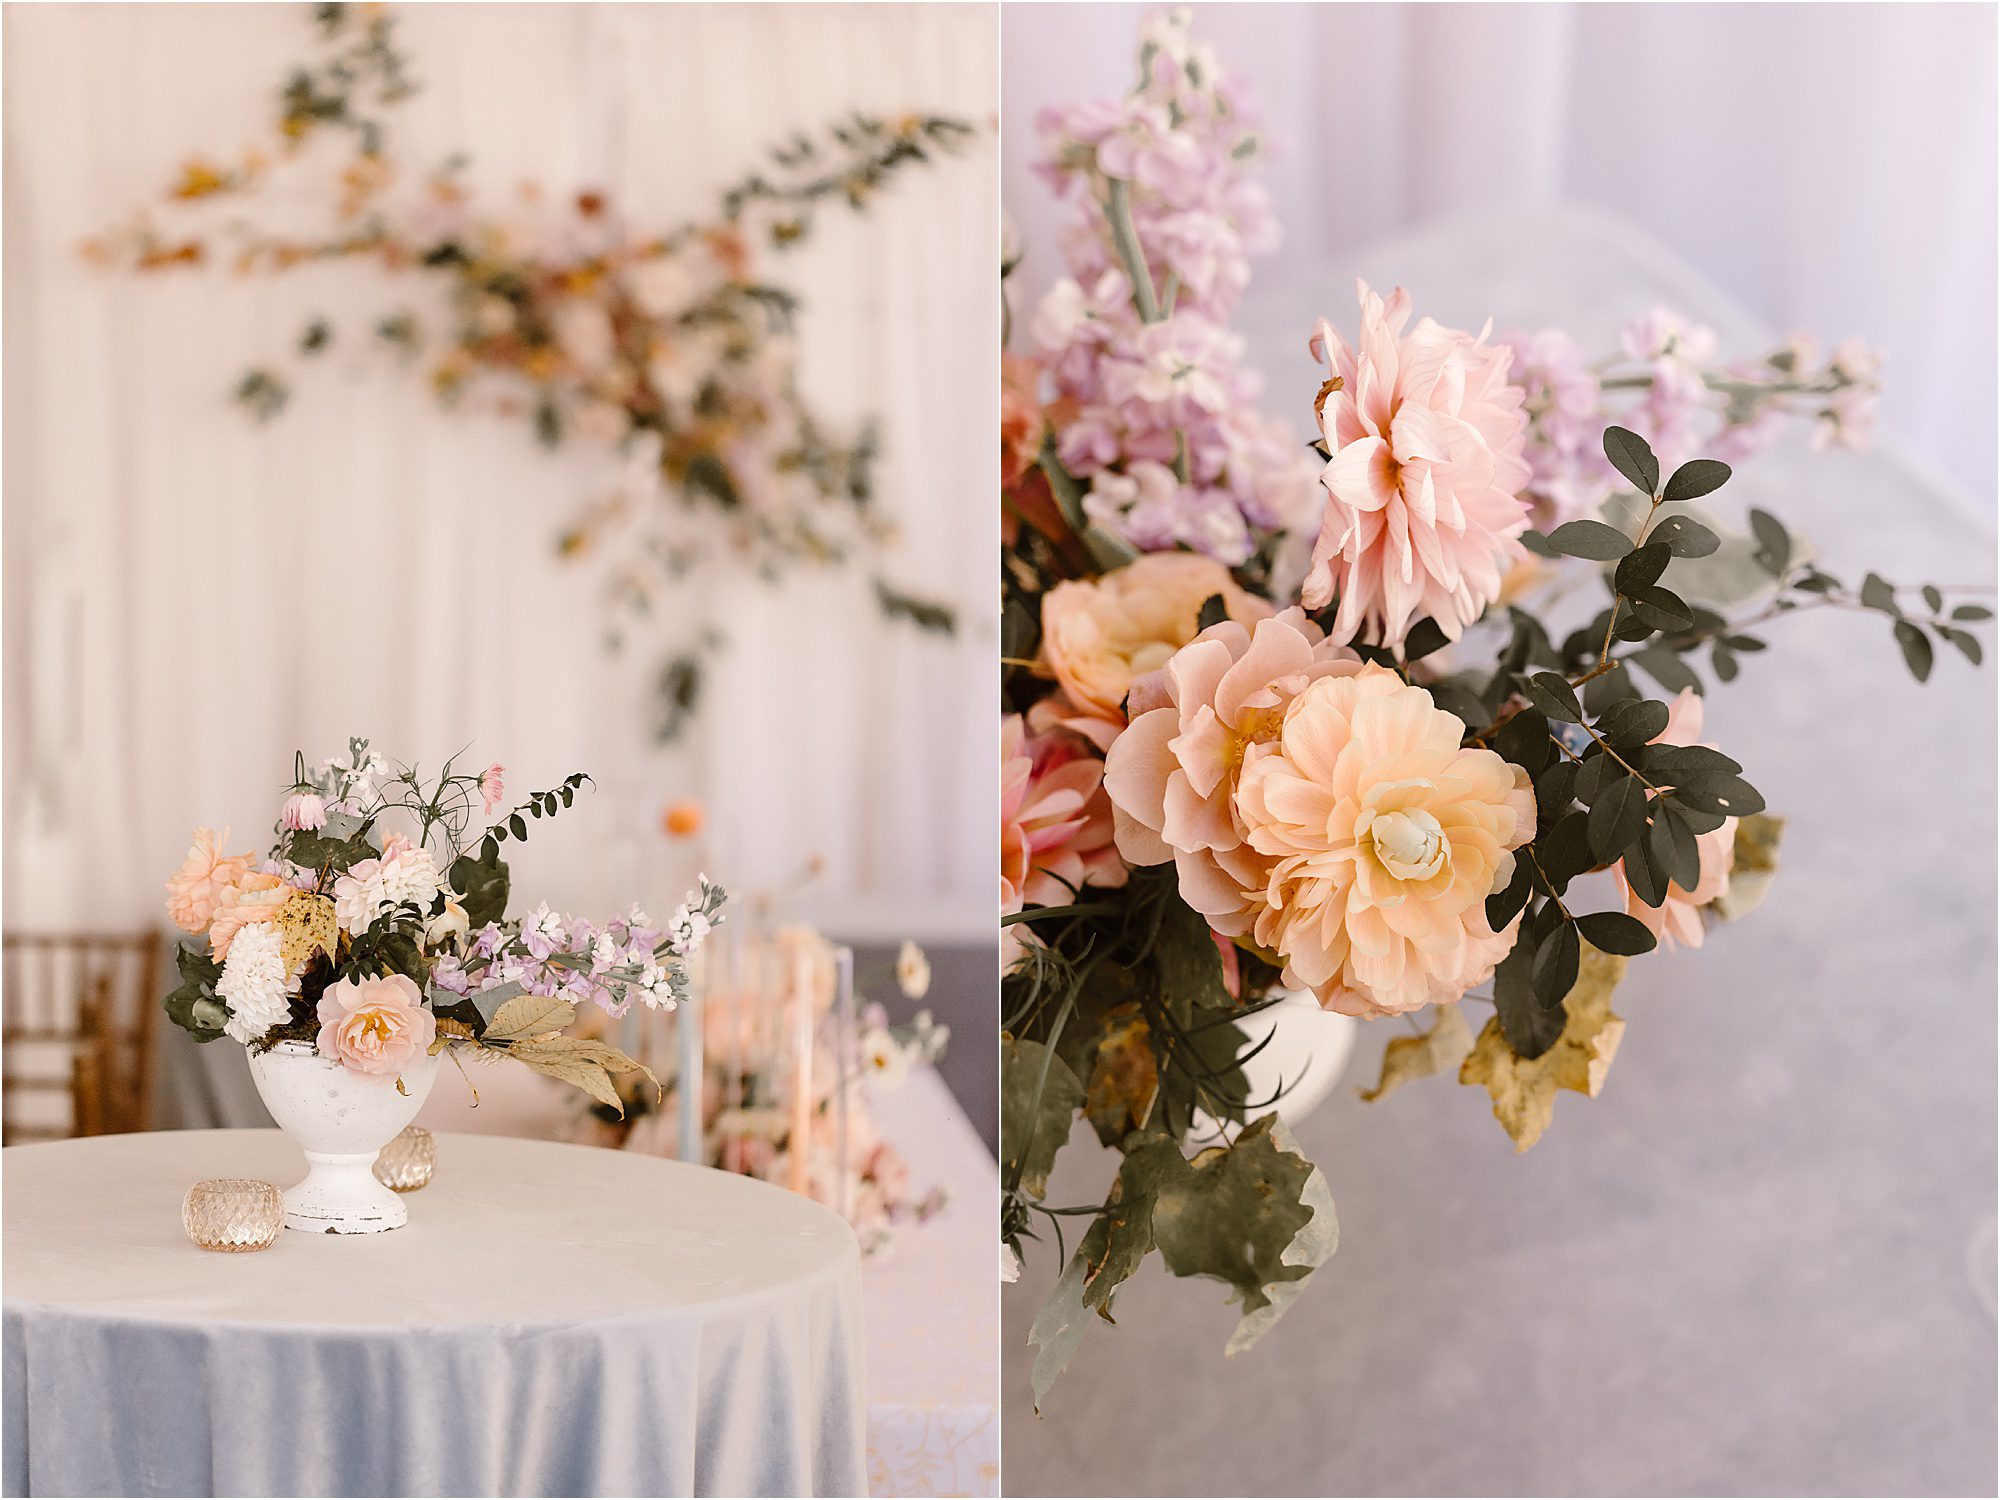 stunning floral reception arrangements with blush peonies and blue velvet tablecloths